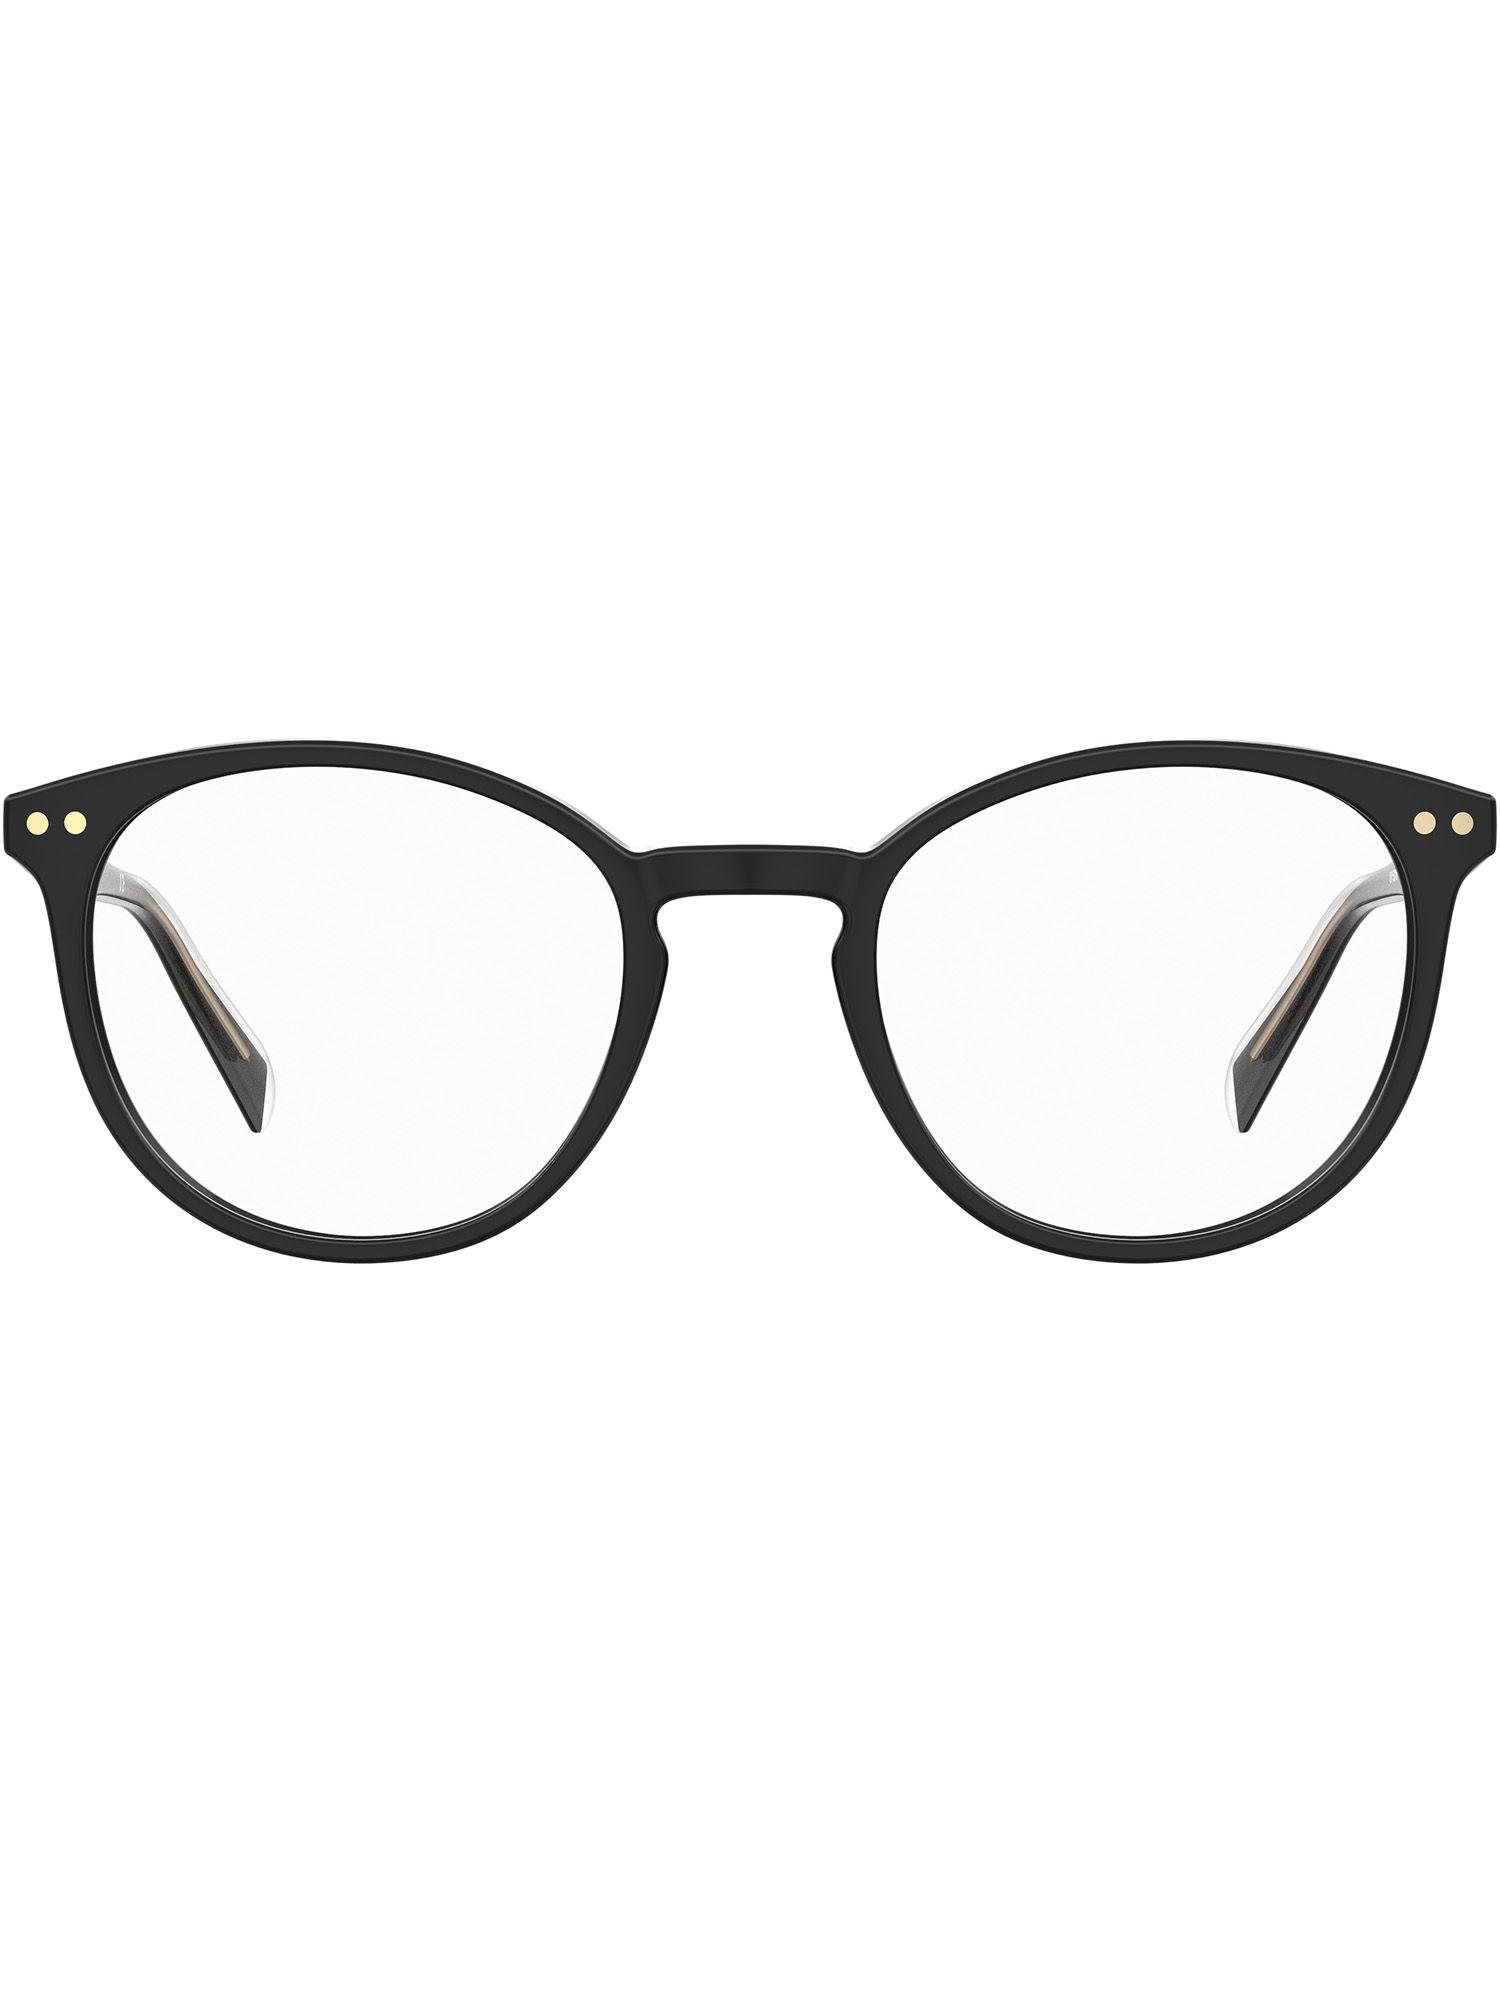 round frame for women eco pmma material in black colour (lv 5016 807 5021)